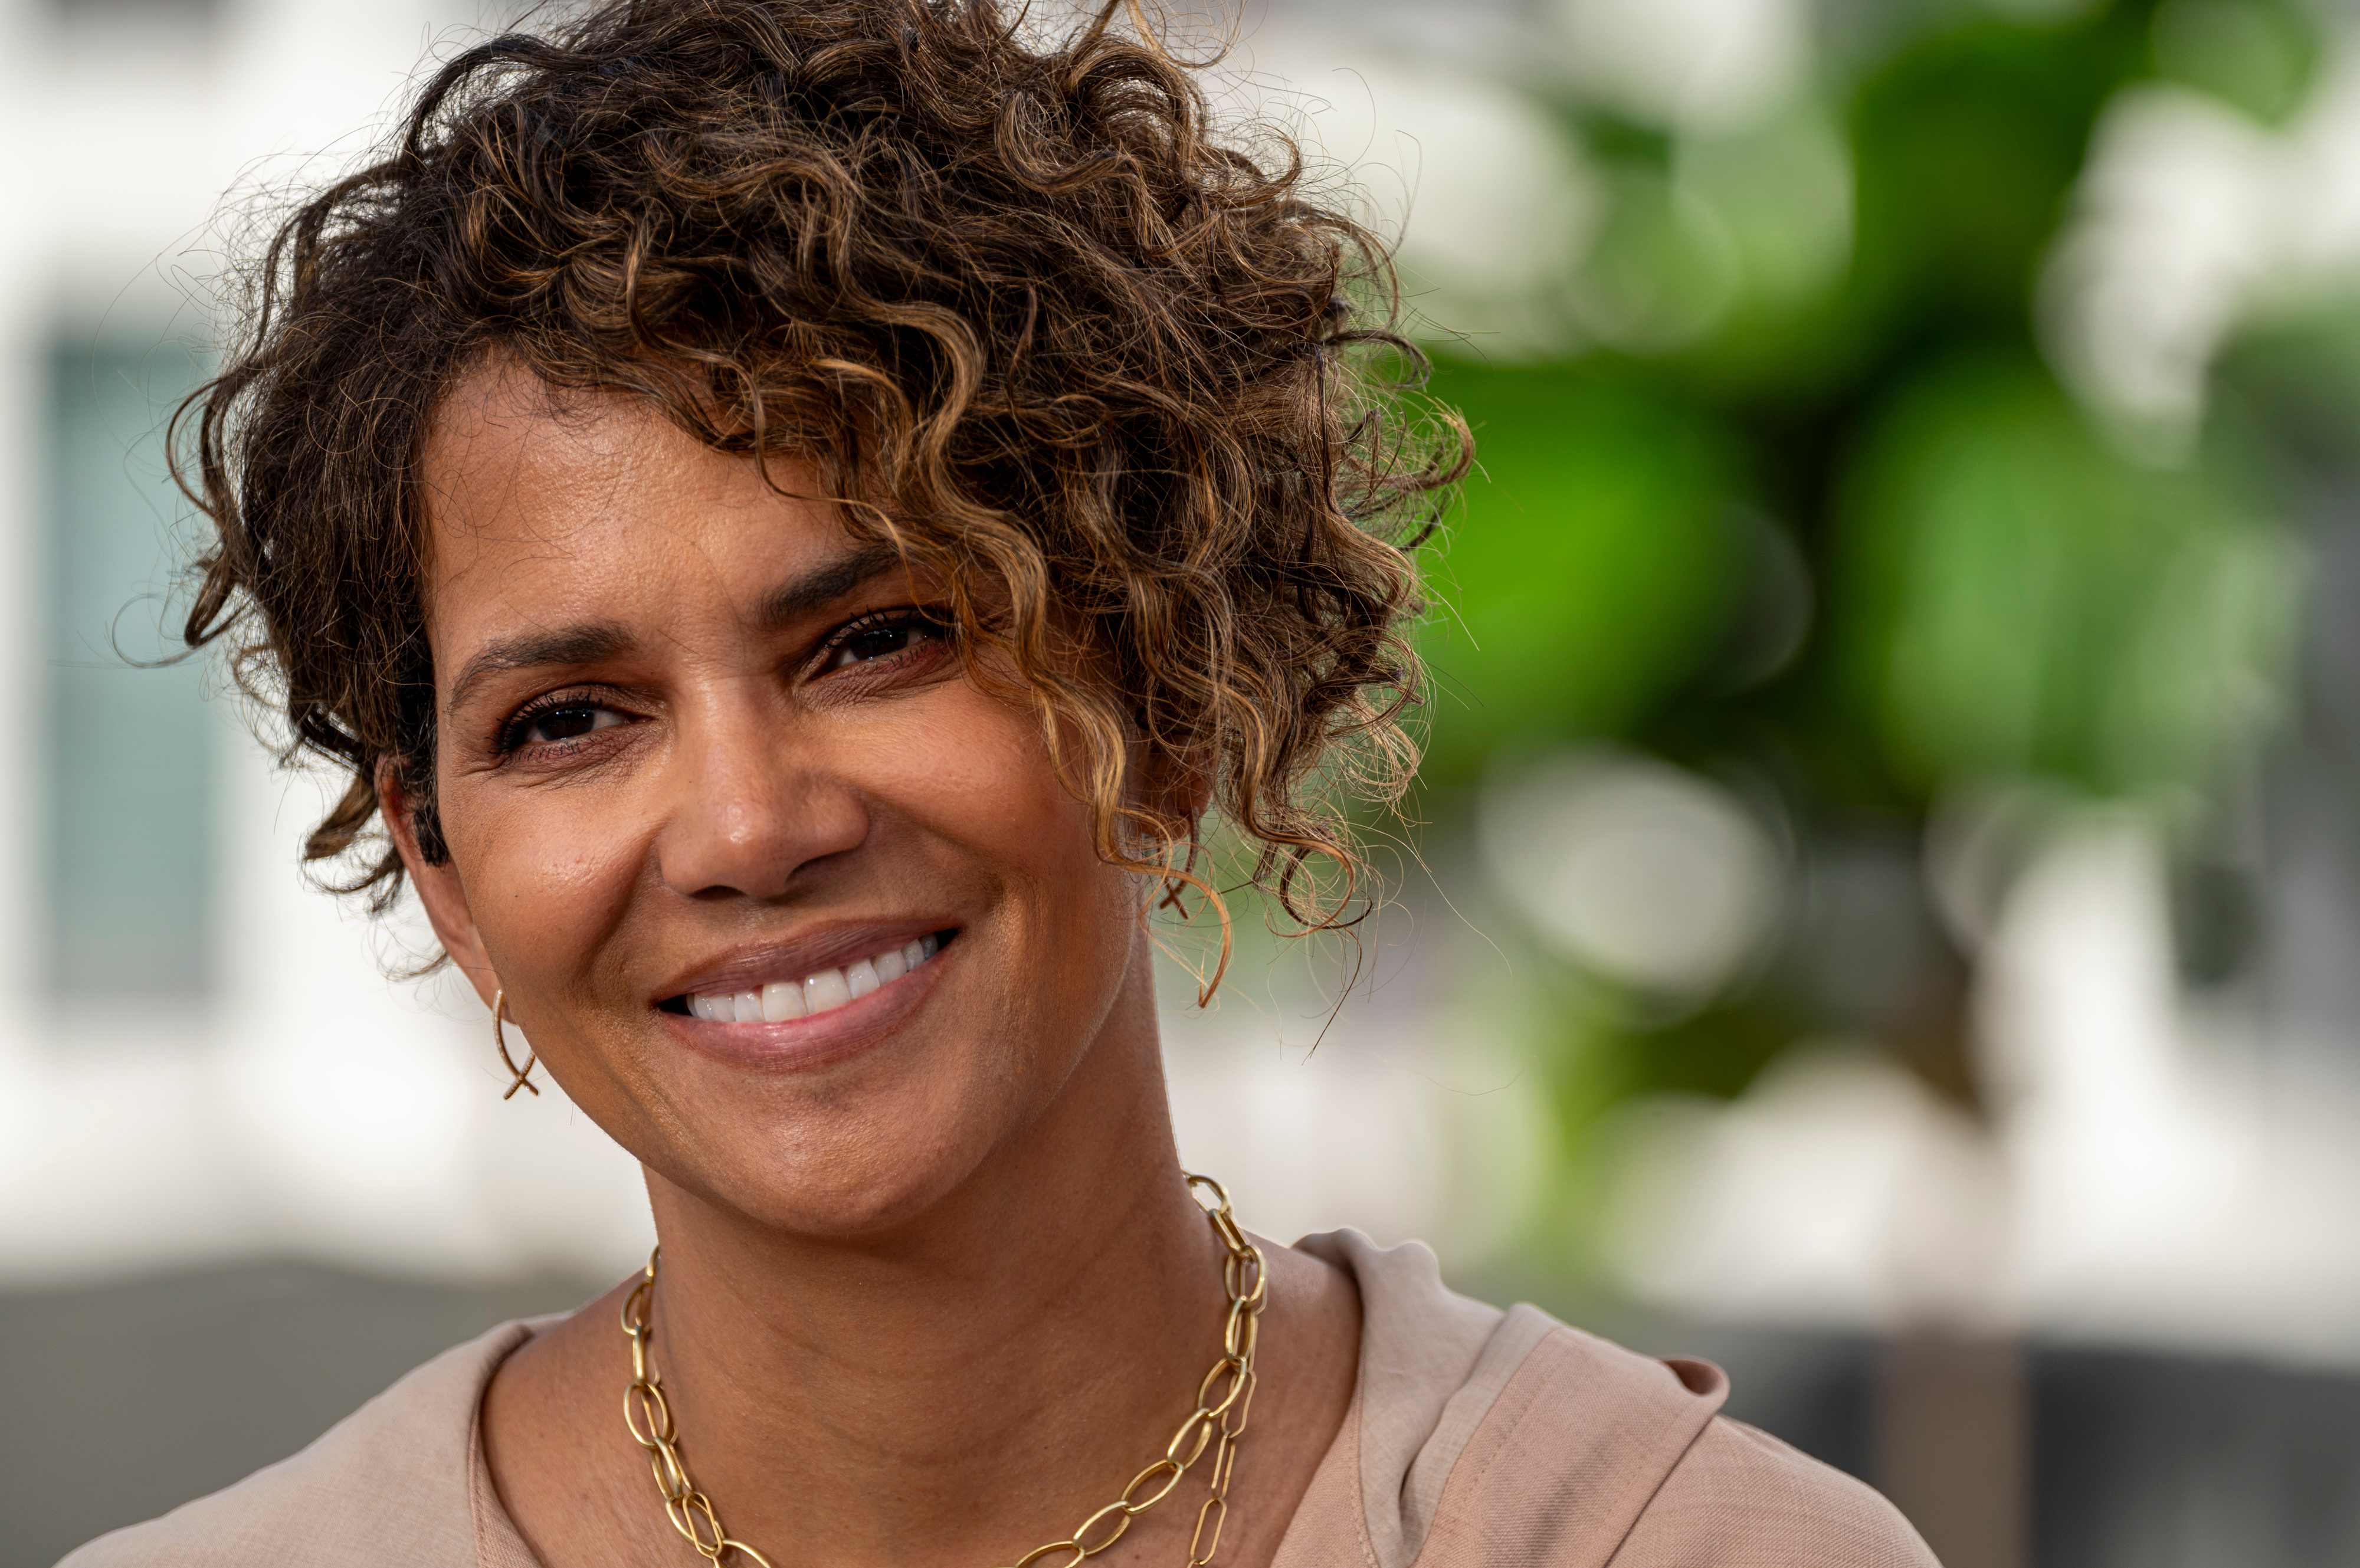 Halle Berry in San Francisco, California on Thursday, June 22, 2023. | Source: Getty Images